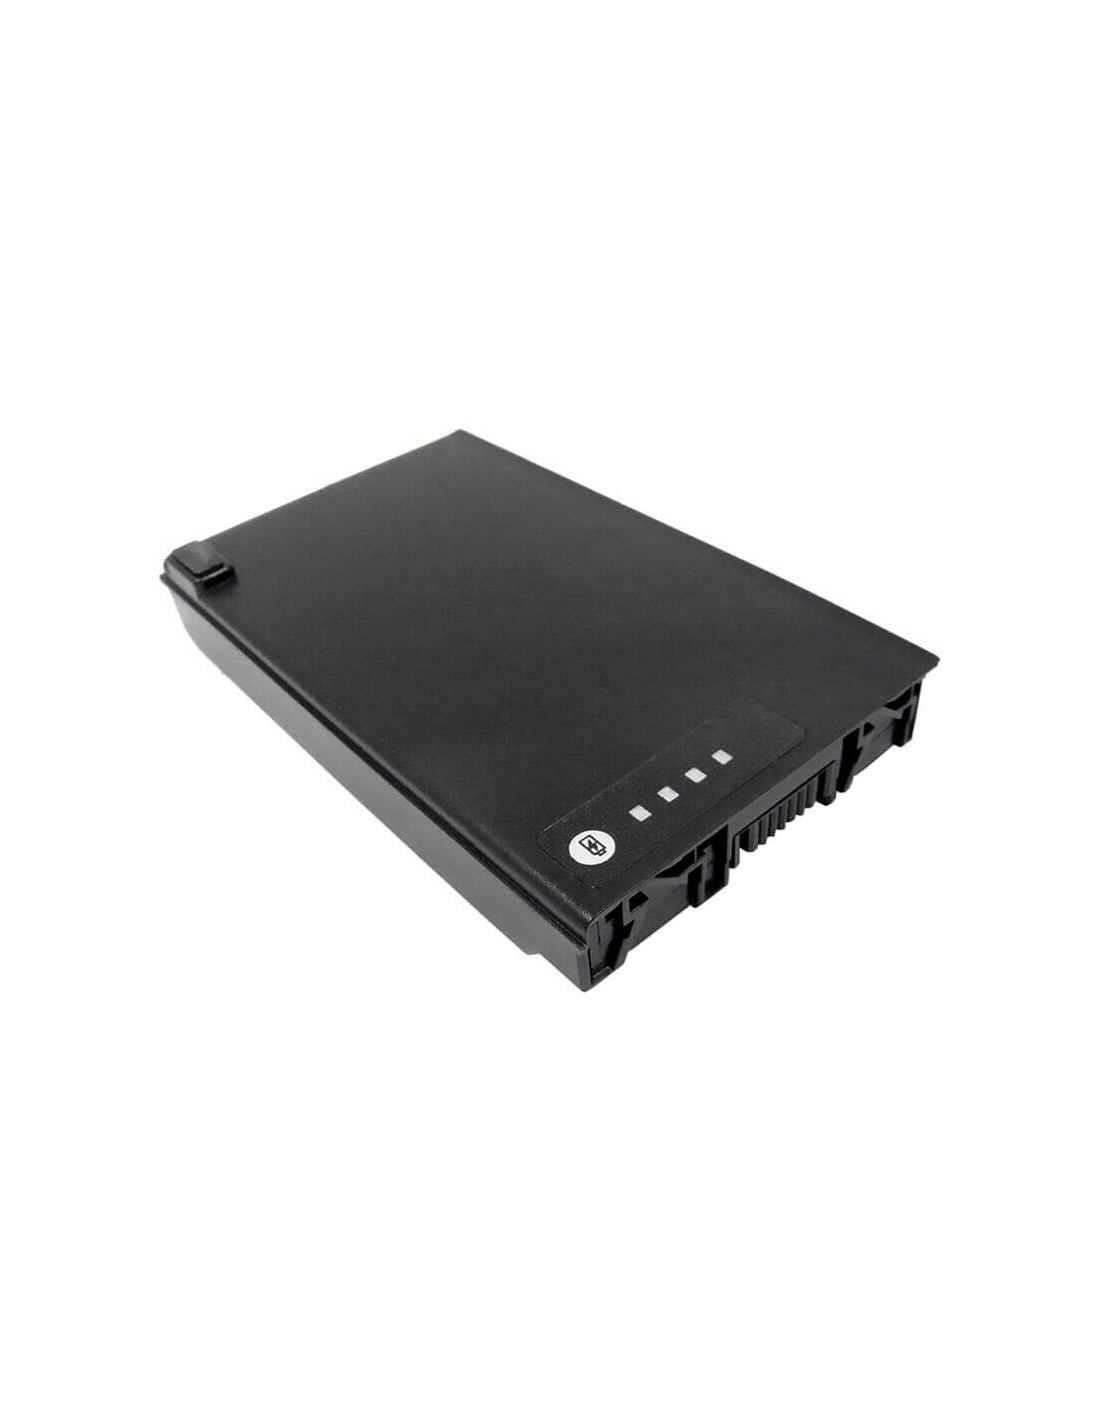 Black Battery for Compaq Business Notebook Tc4400, Business Notebook Nc4200, Business Notebook Tc4200 10.8V, 4400mAh - 47.52Wh